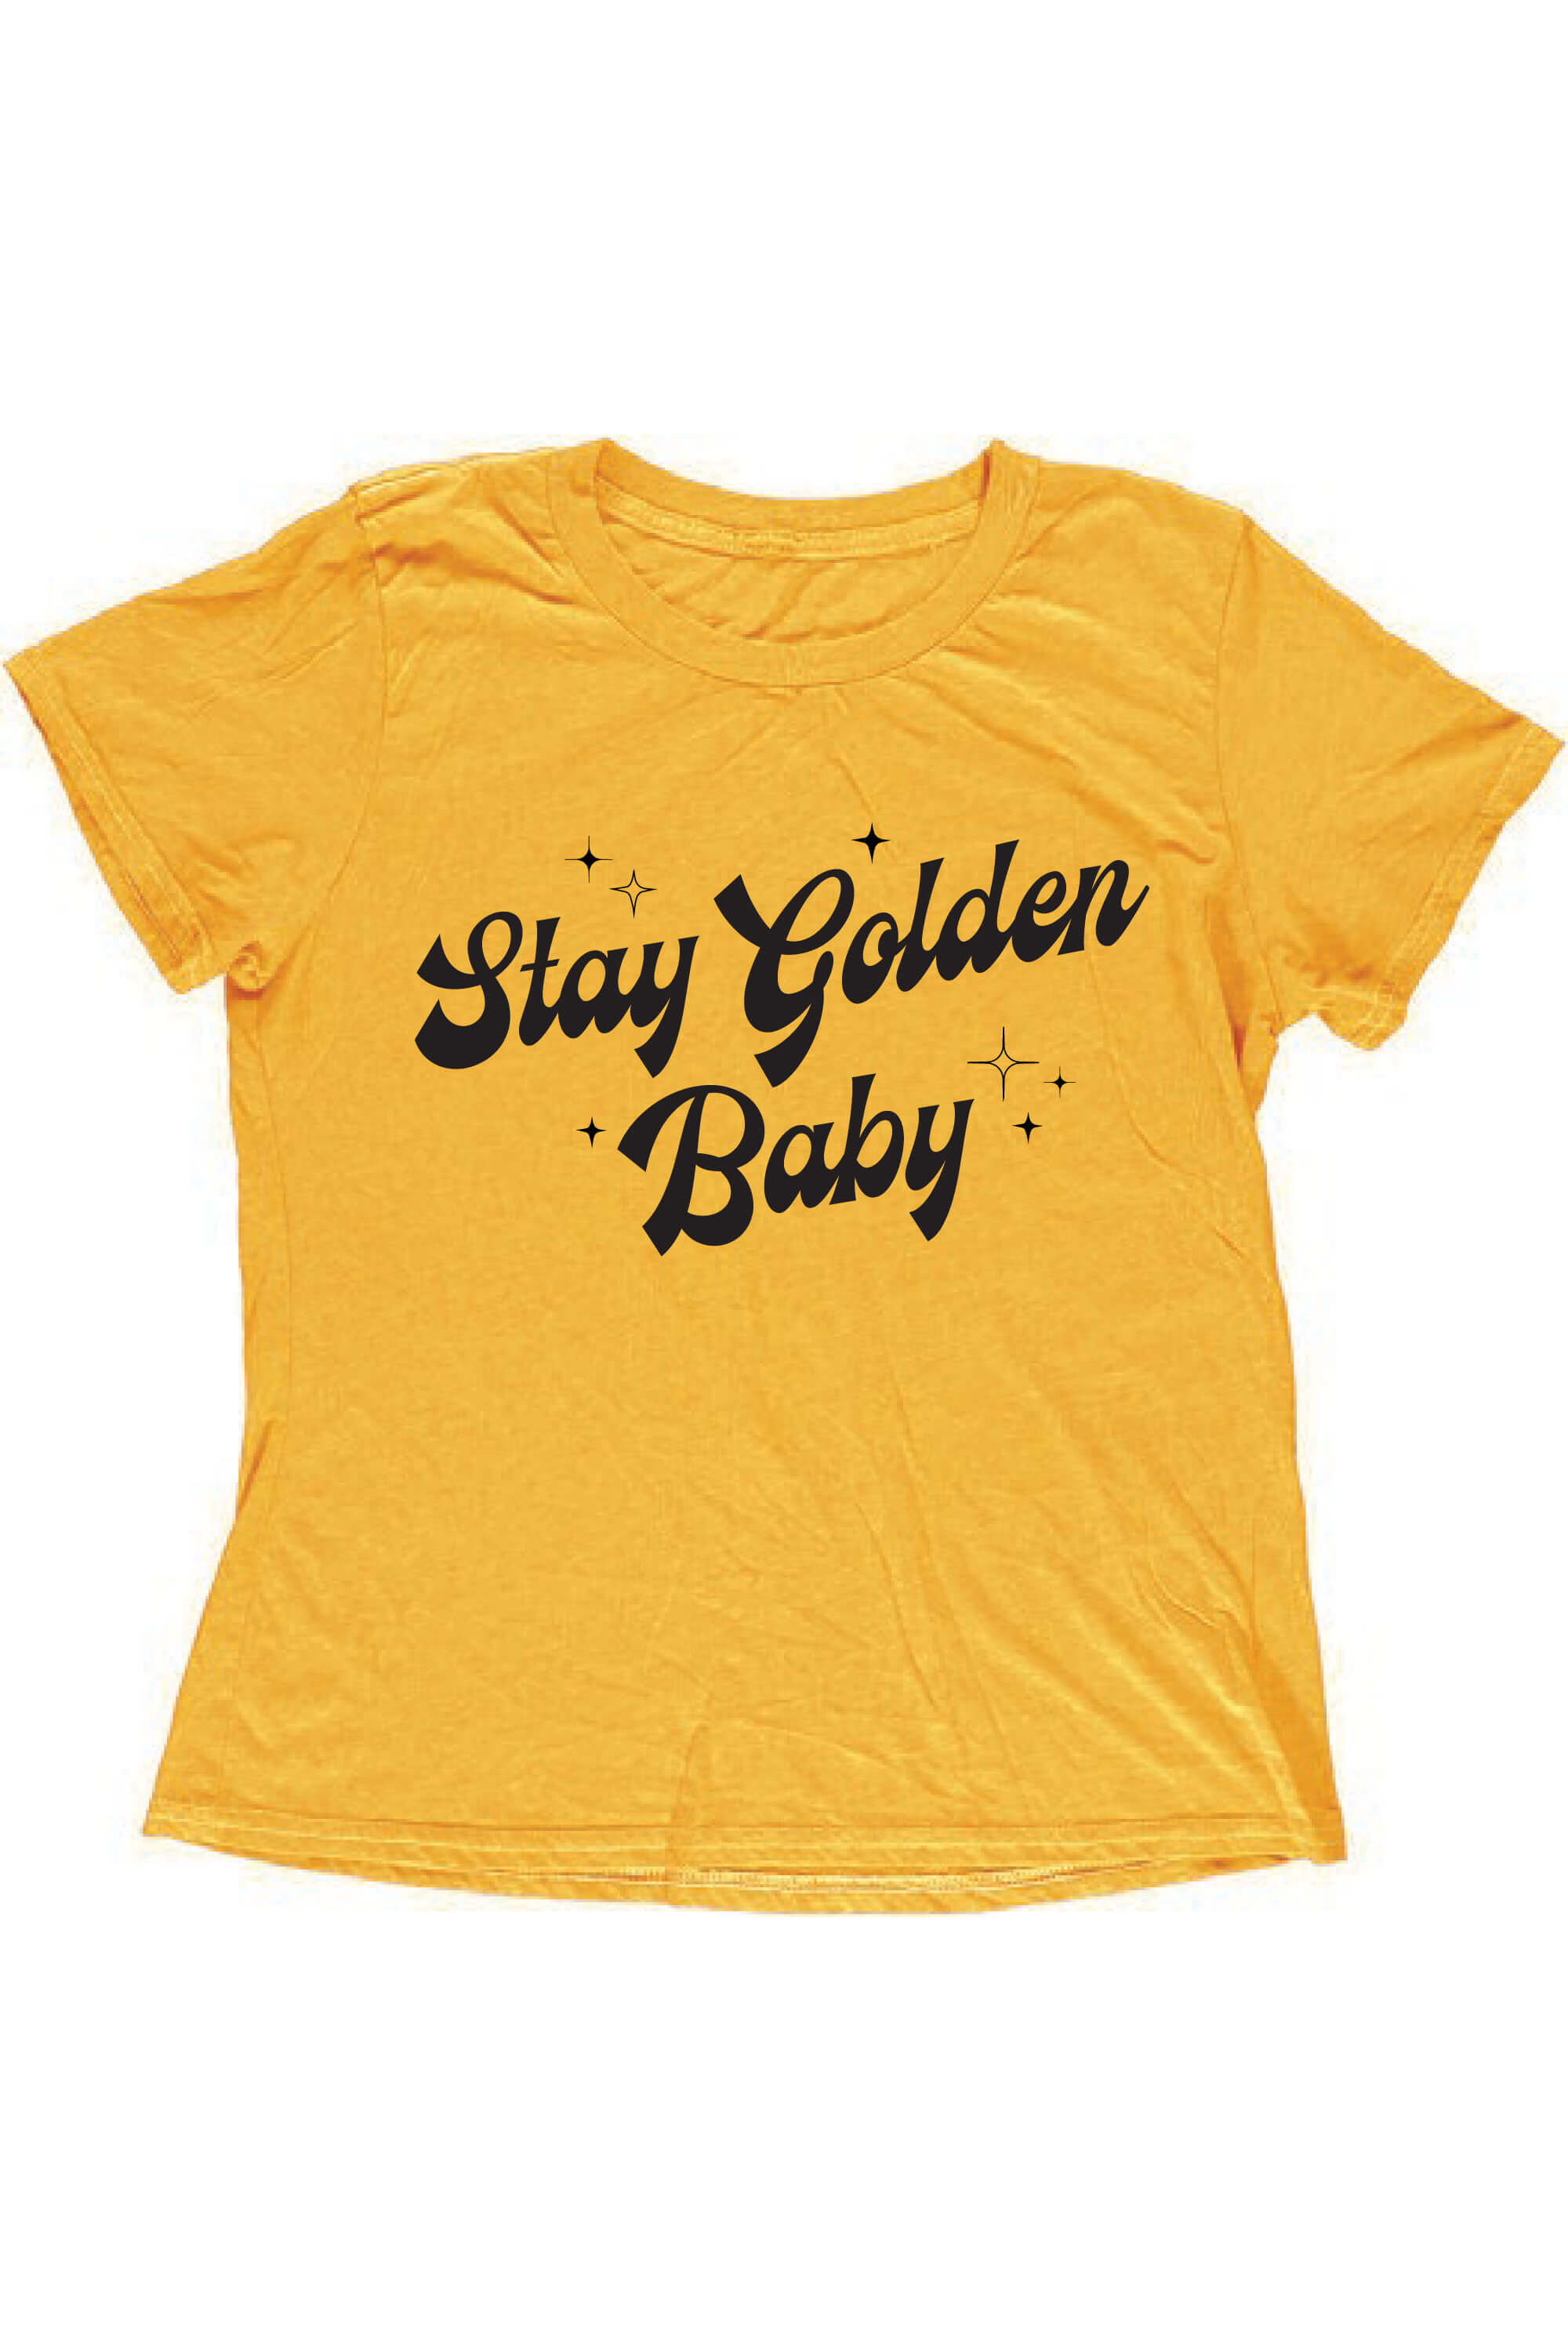 STAY GOLDEN BABY YOUTH SIZE LOOSE TEE